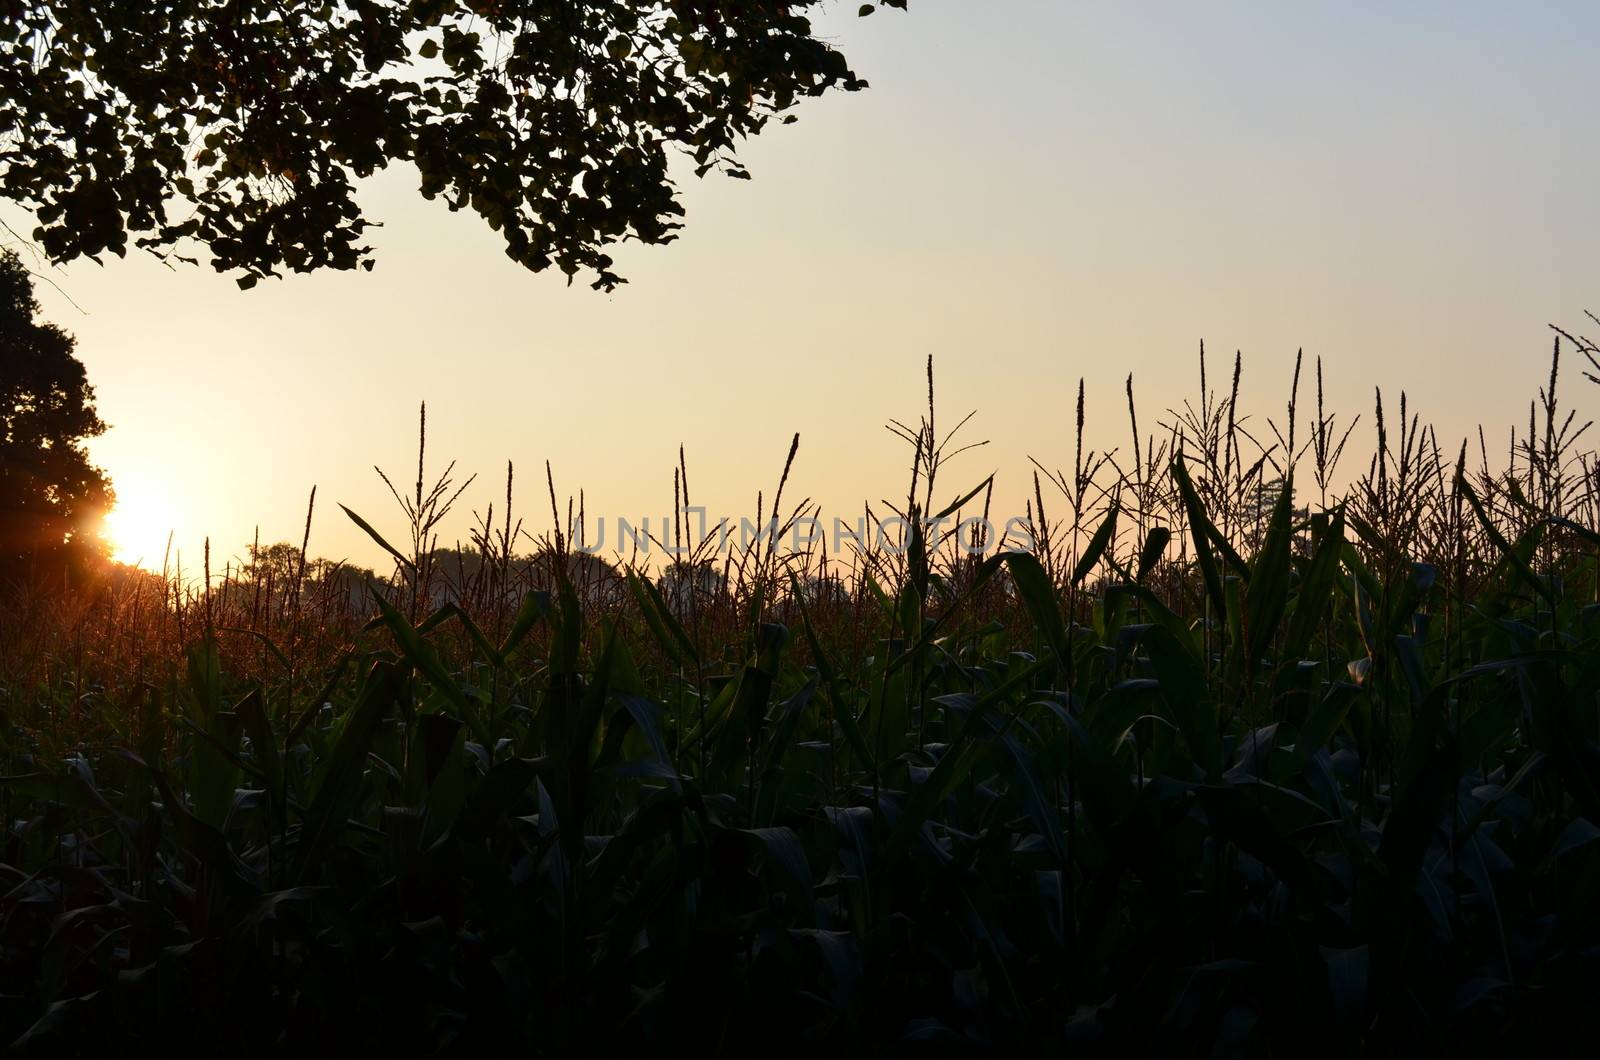 Dawn breaking in Sussex,England over a crop field in September 2013.